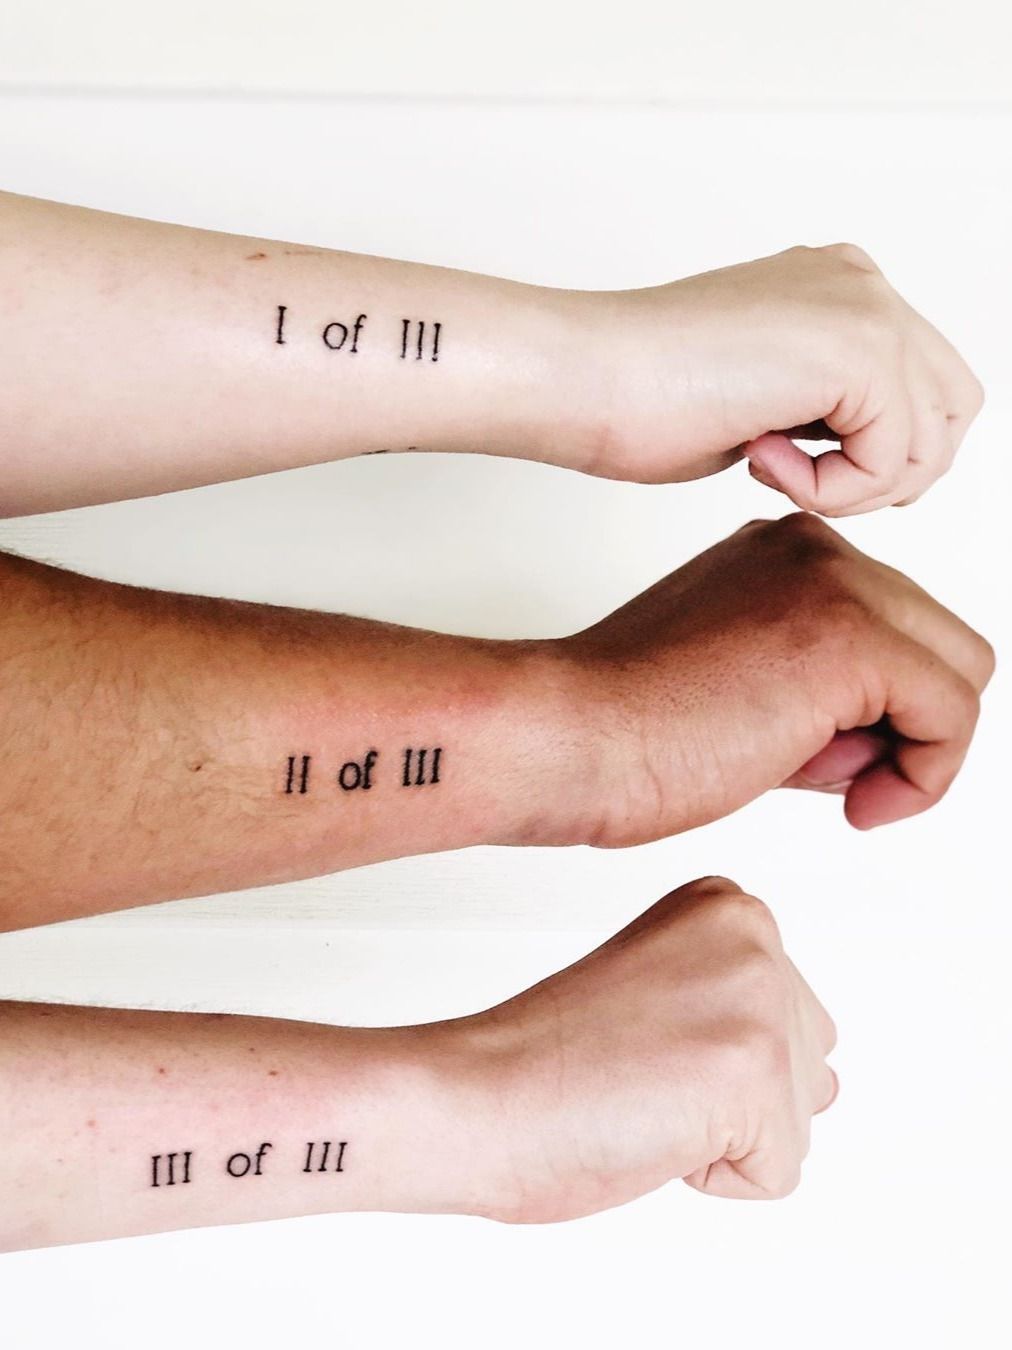 Tattoo uploaded by Justine Morrow • Sibling tattoo for 3 by unknown artist  #sistertattoos #sisters #sistertattooidea #familytattoo #siblingtattoo  #matchingtattoo #bfftattoo #siblingtattoofor3 #3matchingtattoos  #romannumerals #numbers #minimal #simple ...